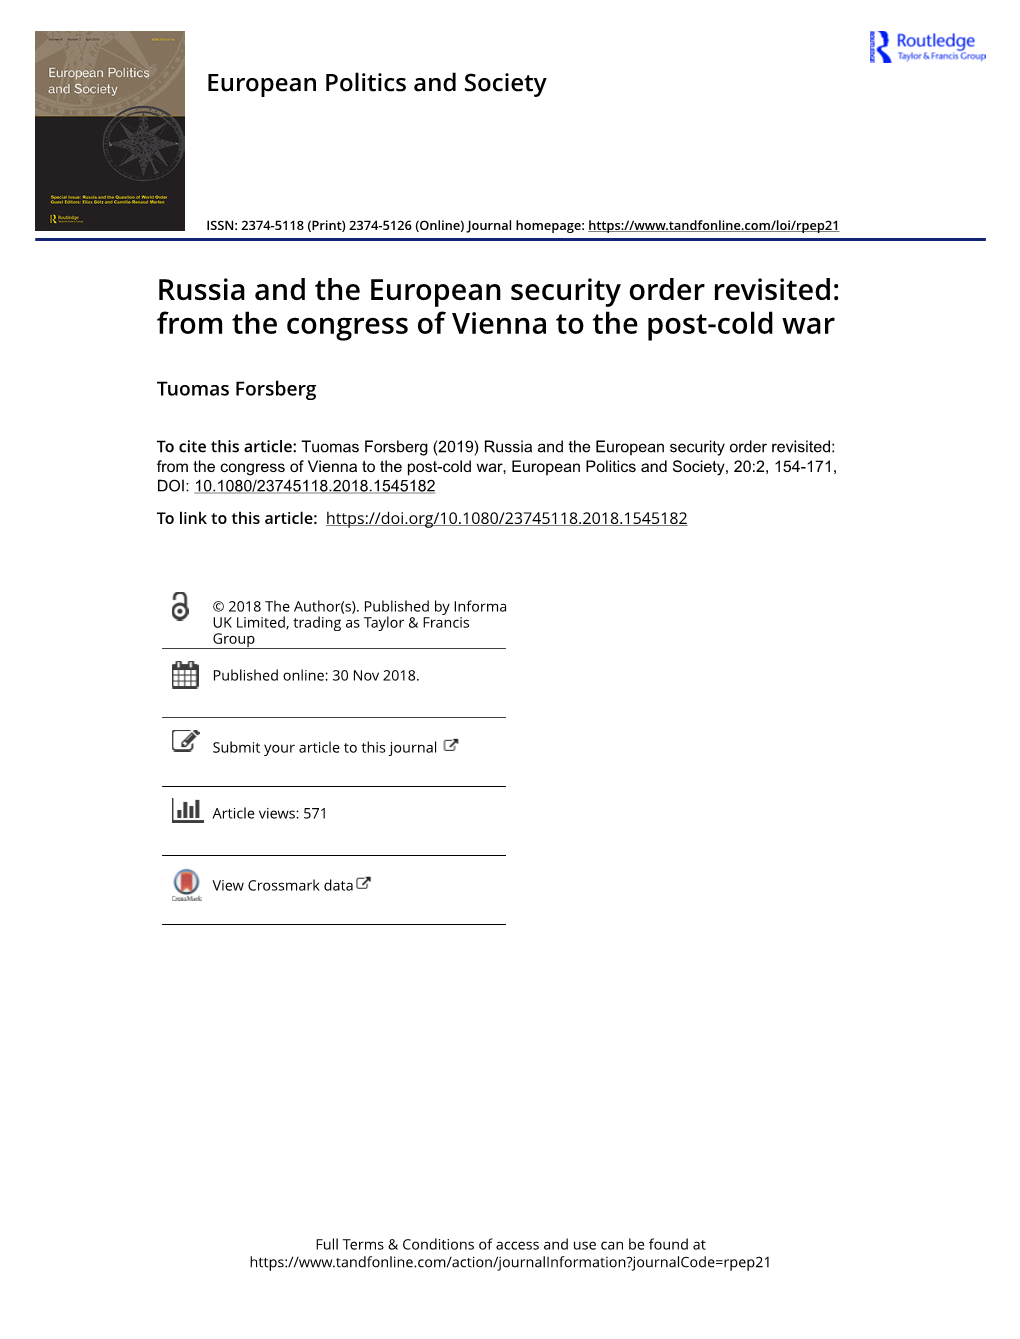 Russia and the European Security Order Revisited: from the Congress of Vienna to the Post-Cold War